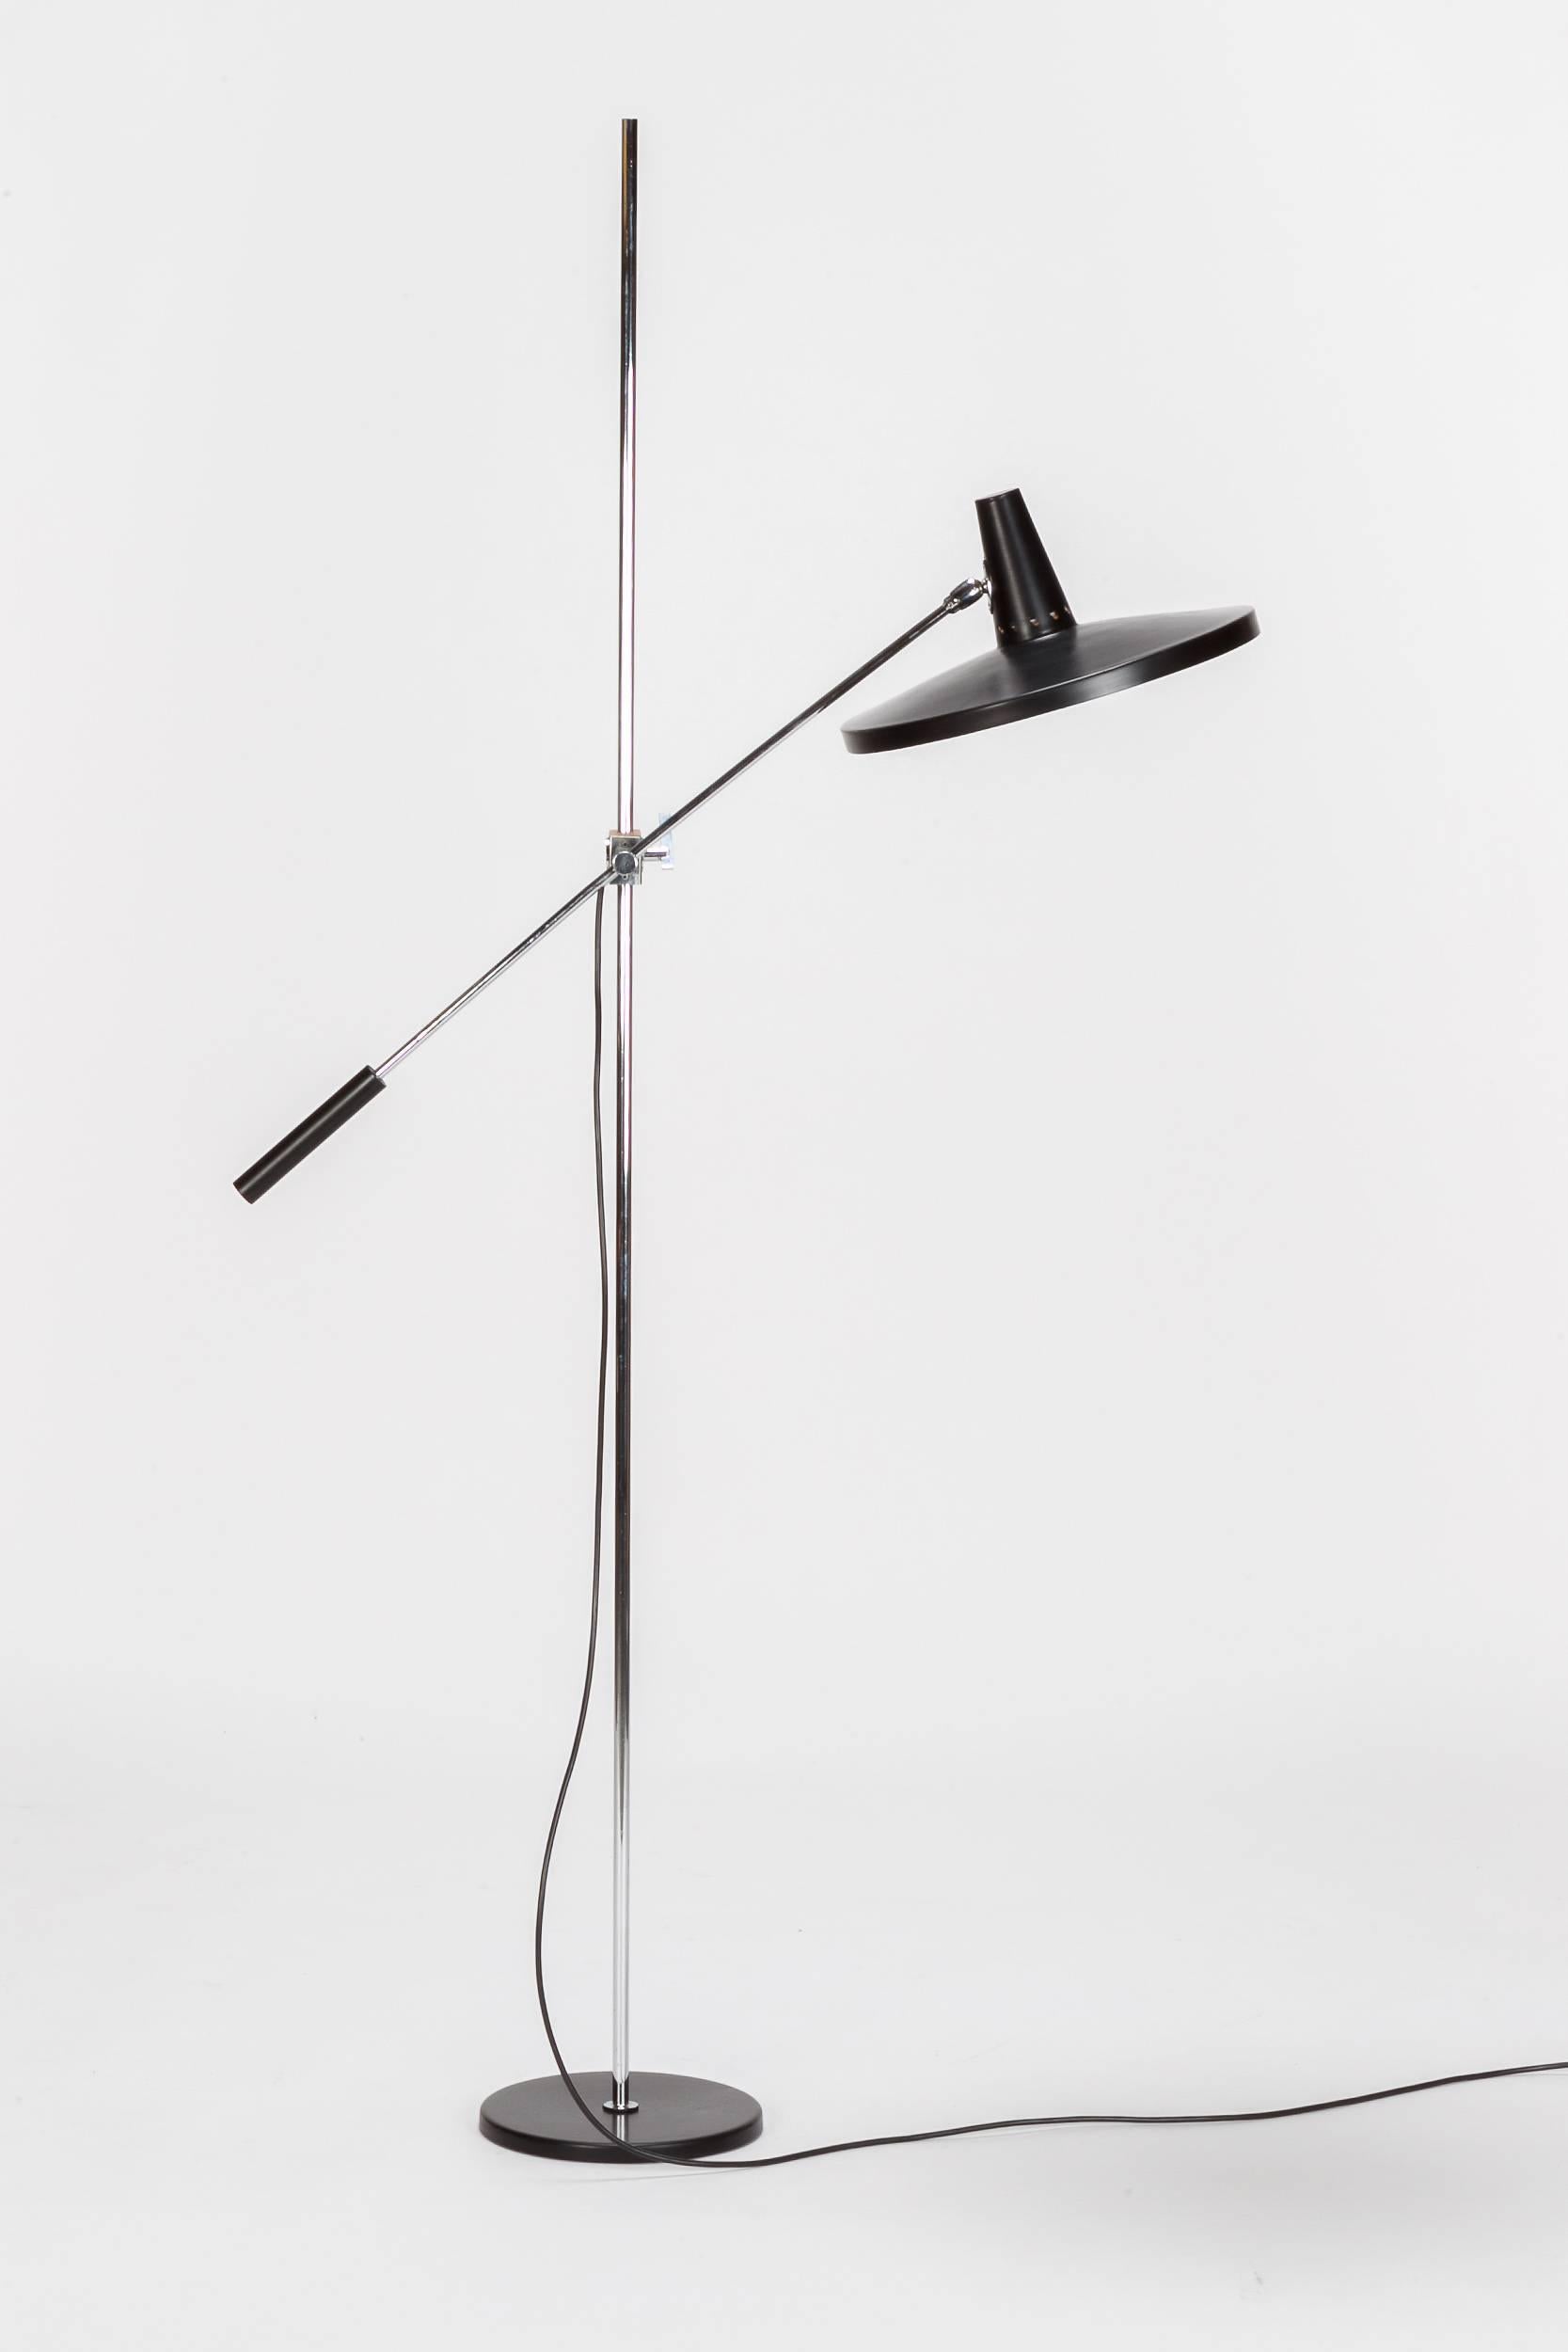 Lacquered Swiss Floor Lamp Attributed to Rico & Rosemarie Baltensweiler 1960s